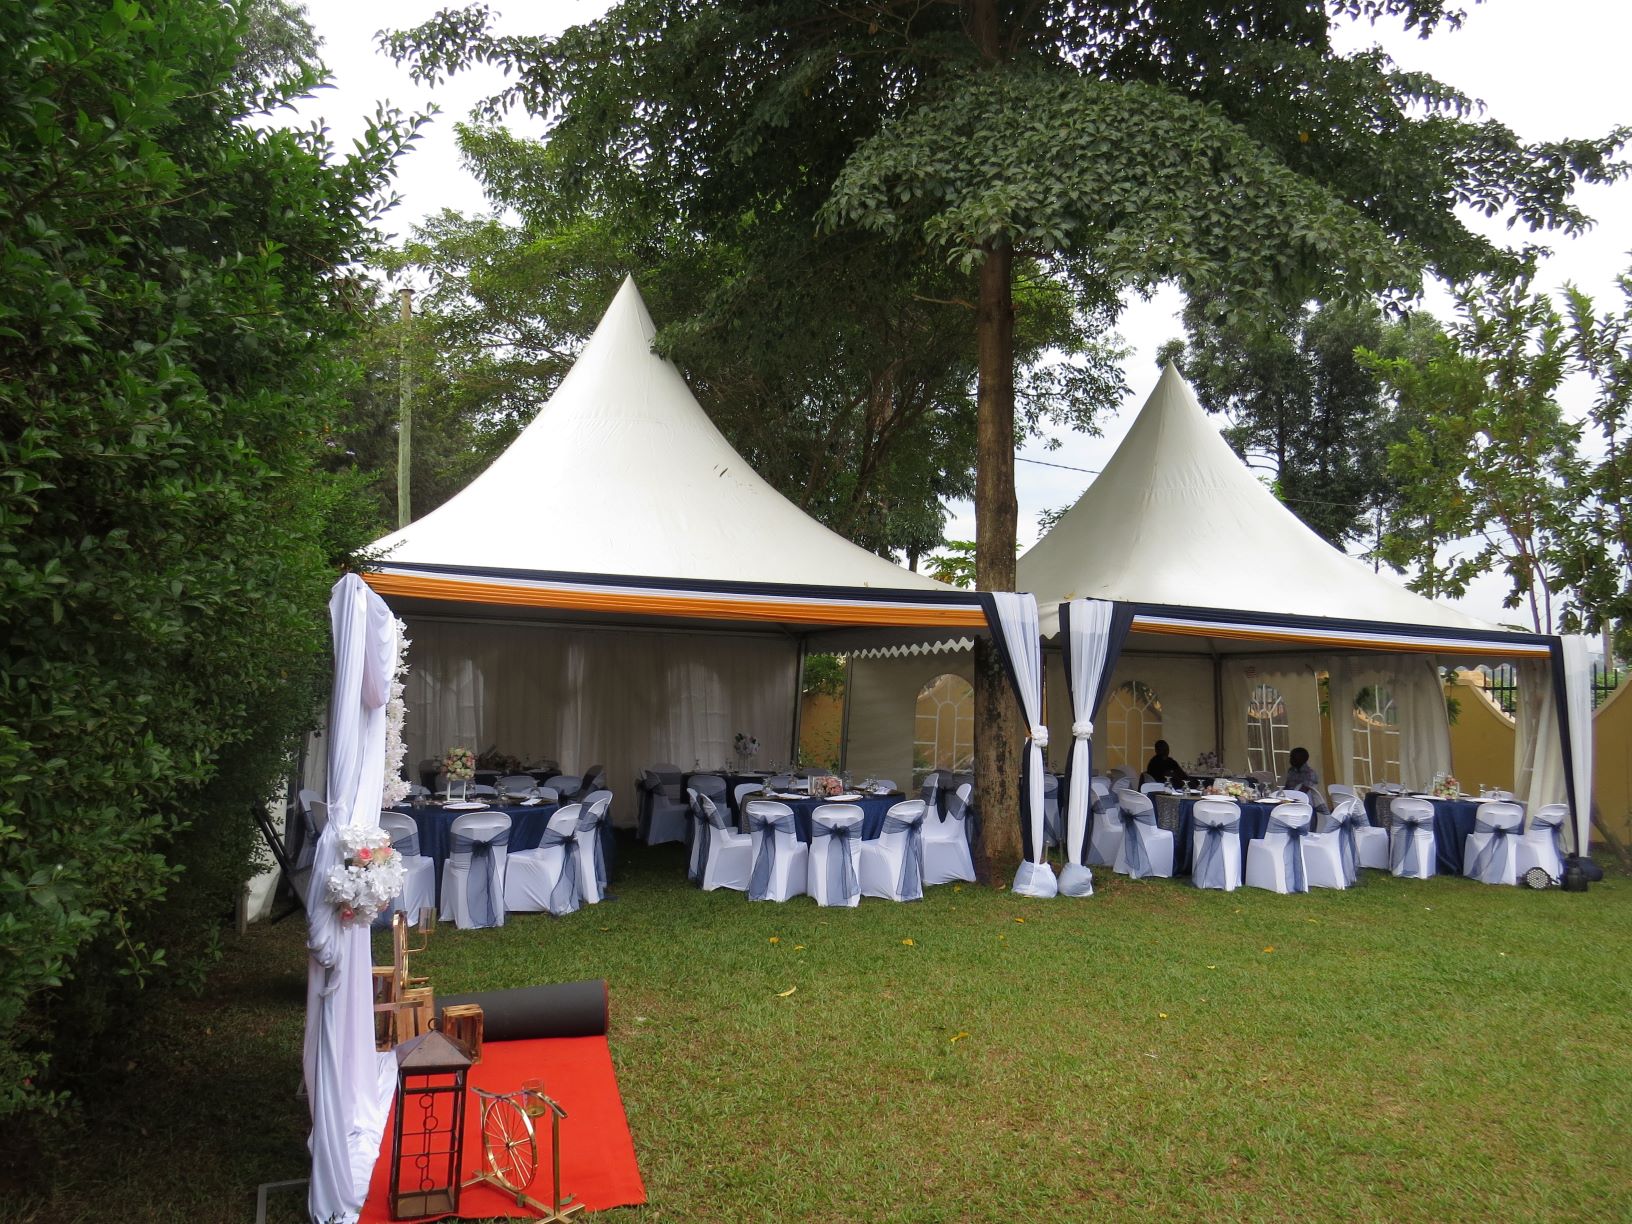 Our Pagola tents are a good choice for small size functions and serving food at larger functions